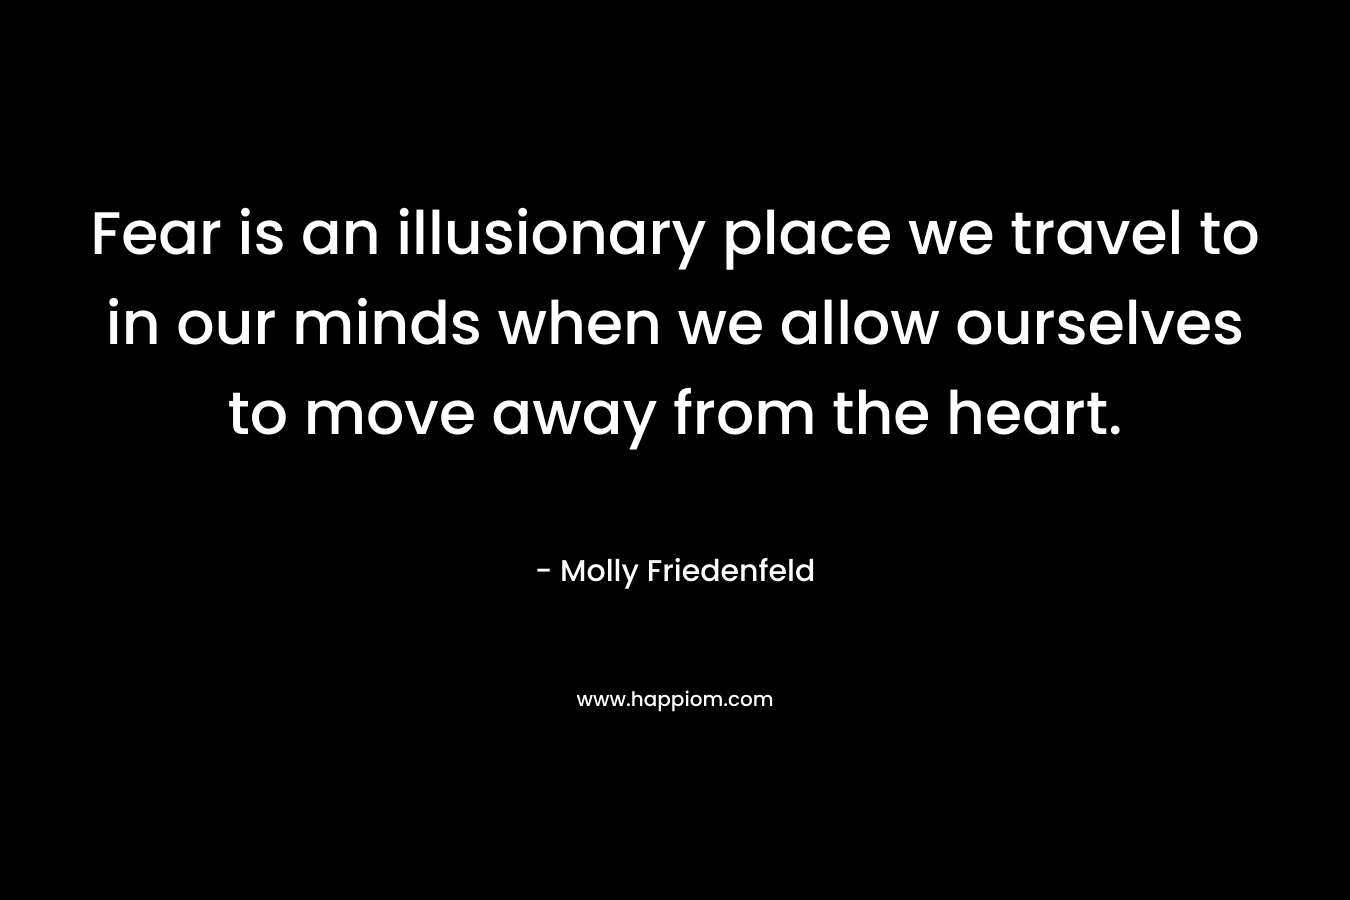 Fear is an illusionary place we travel to in our minds when we allow ourselves to move away from the heart.